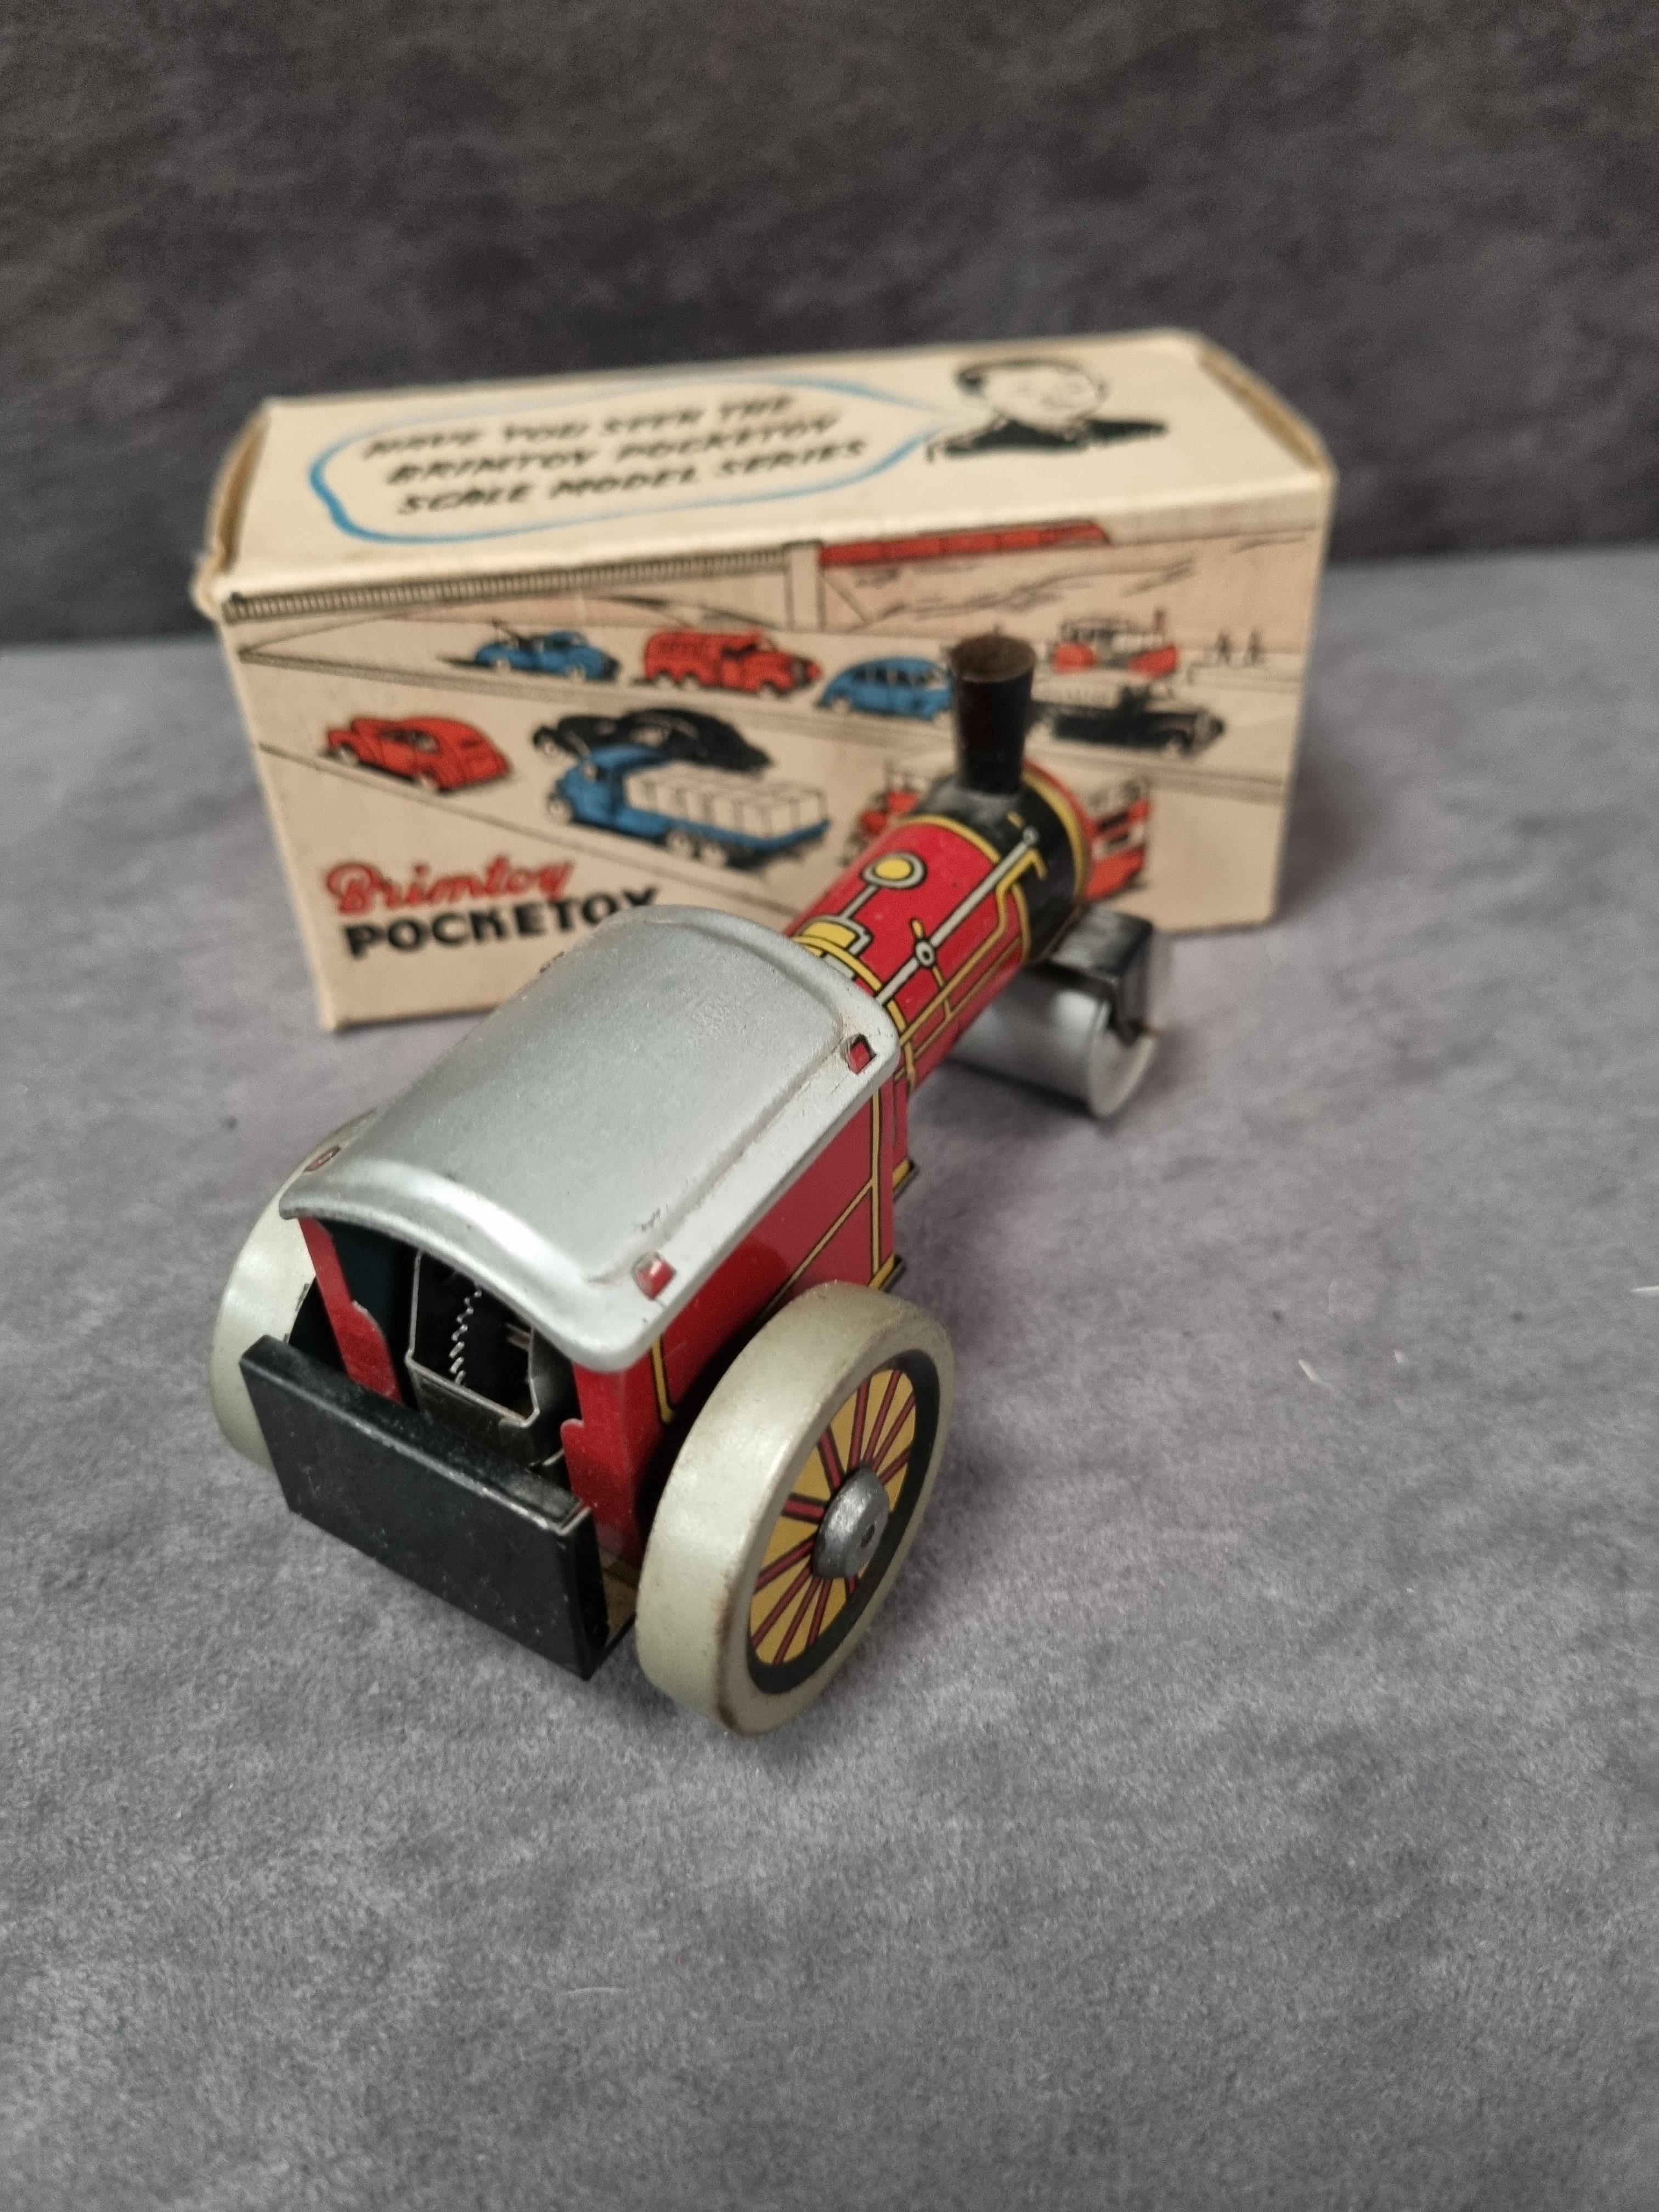 Brimtoy pocket toy 9/501mechanical steam roller tin plate with key in box - Image 4 of 4